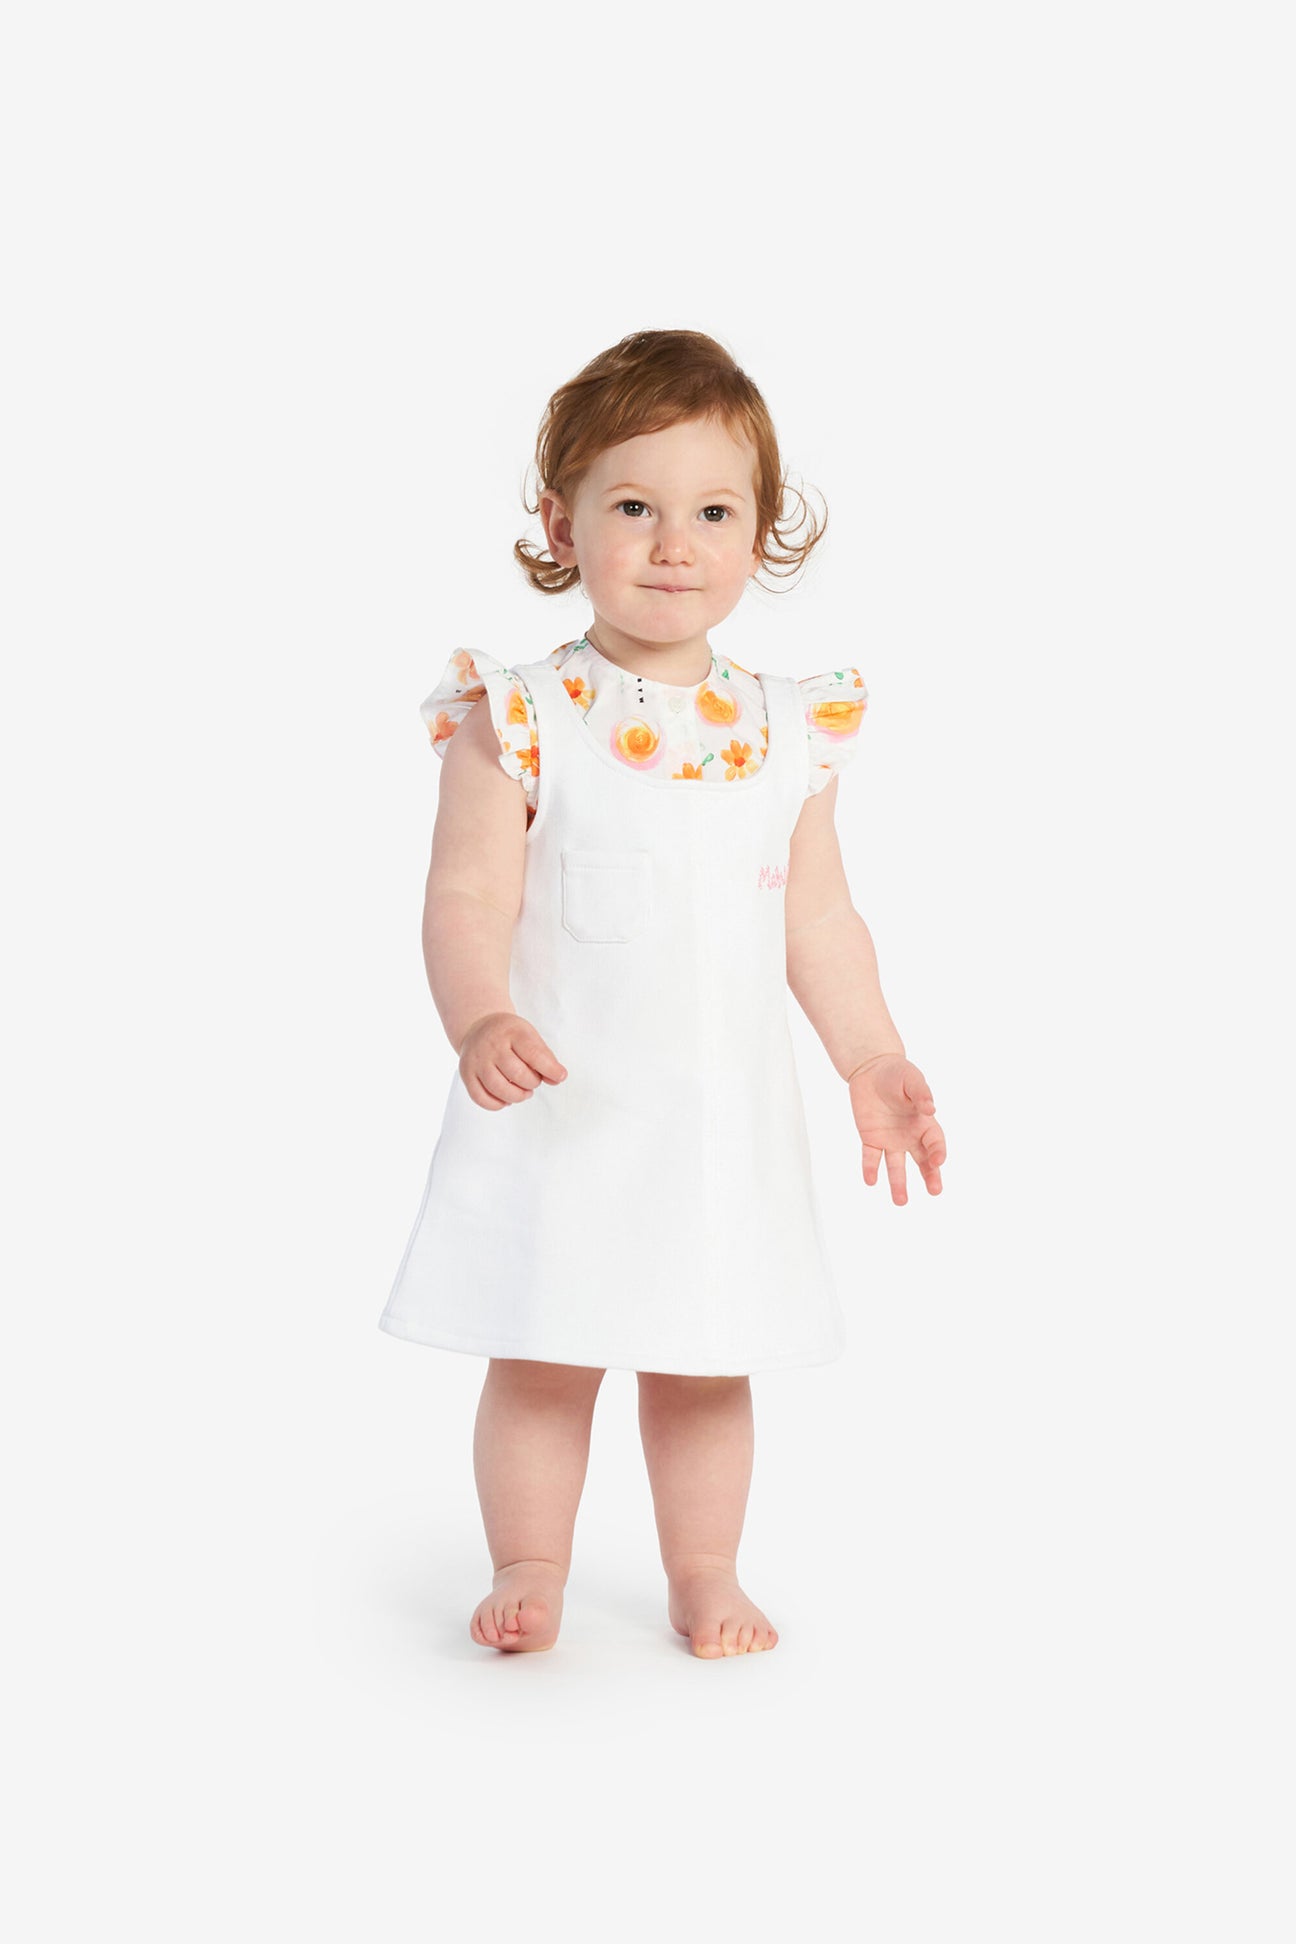 Babies' Clothing: Dresses for Babies from 0 to 36 months